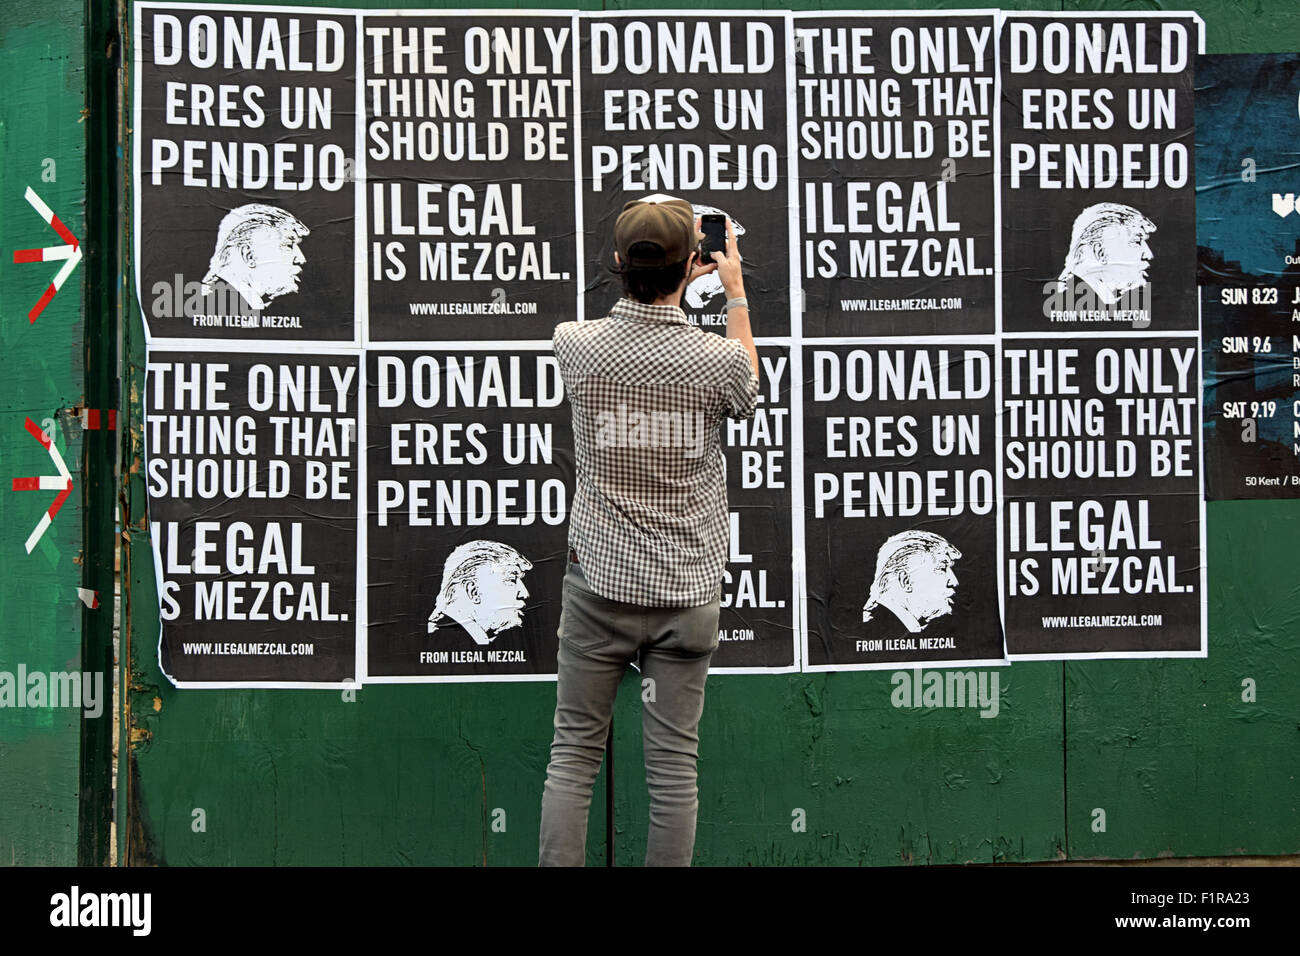 A man takes photos of posters on Bedford Ave in Brooklyn calling Donald Trump a pendejo which is Spanish for idiot & mocking his immigration policy. Stock Photo